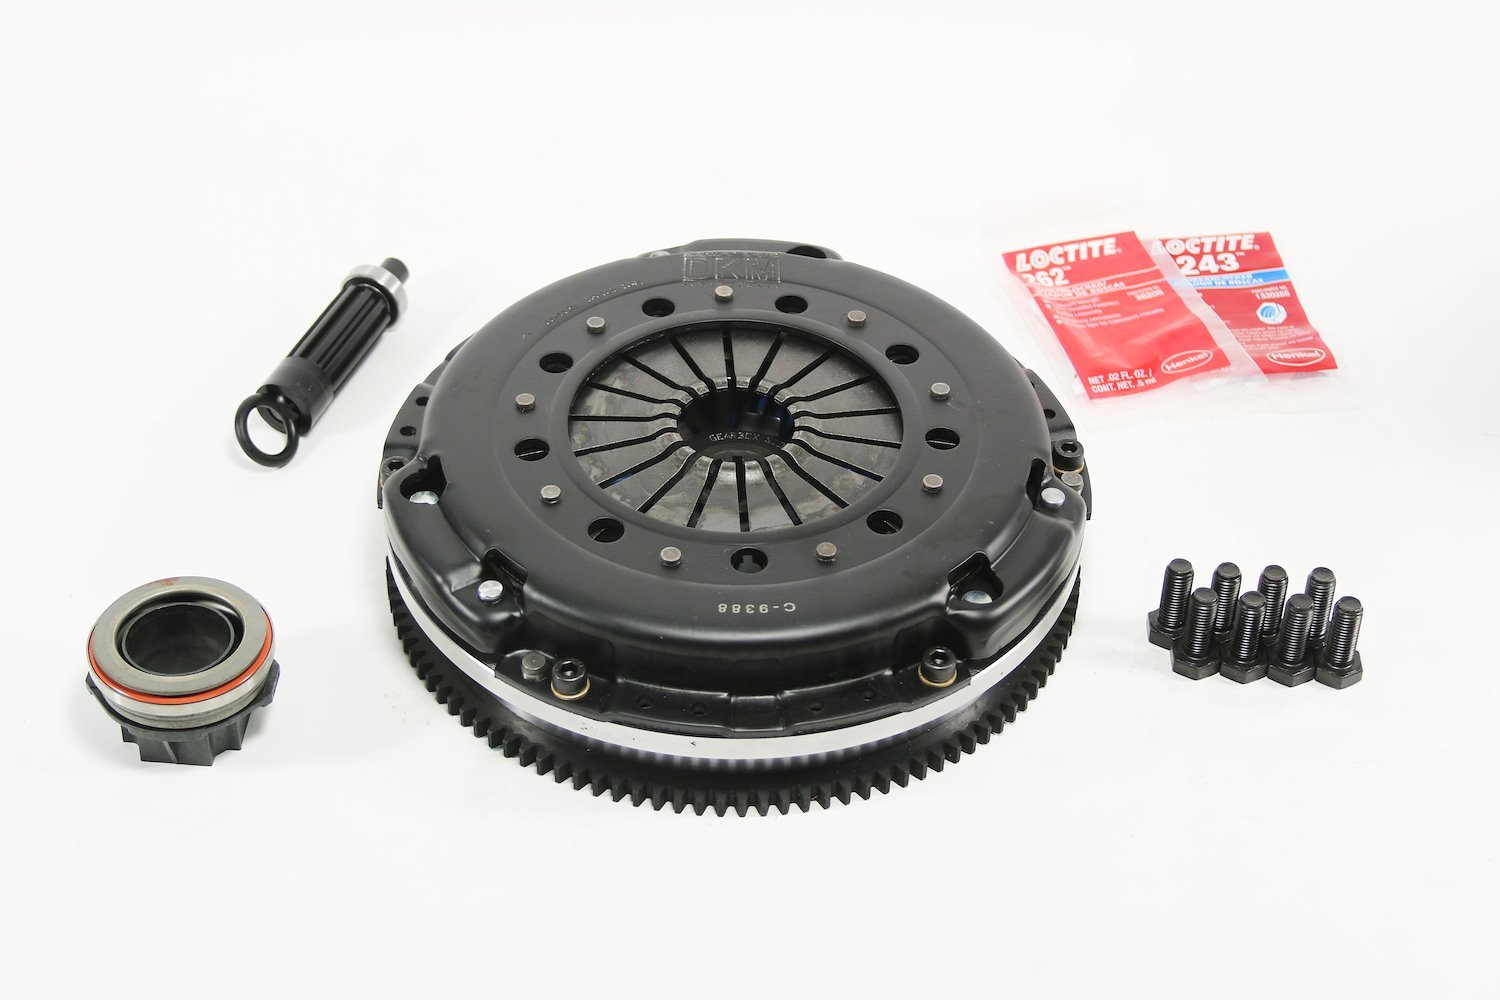 MB-030-050 Performance Organic Clutch Kit for Mini Cooper, with Flywheel